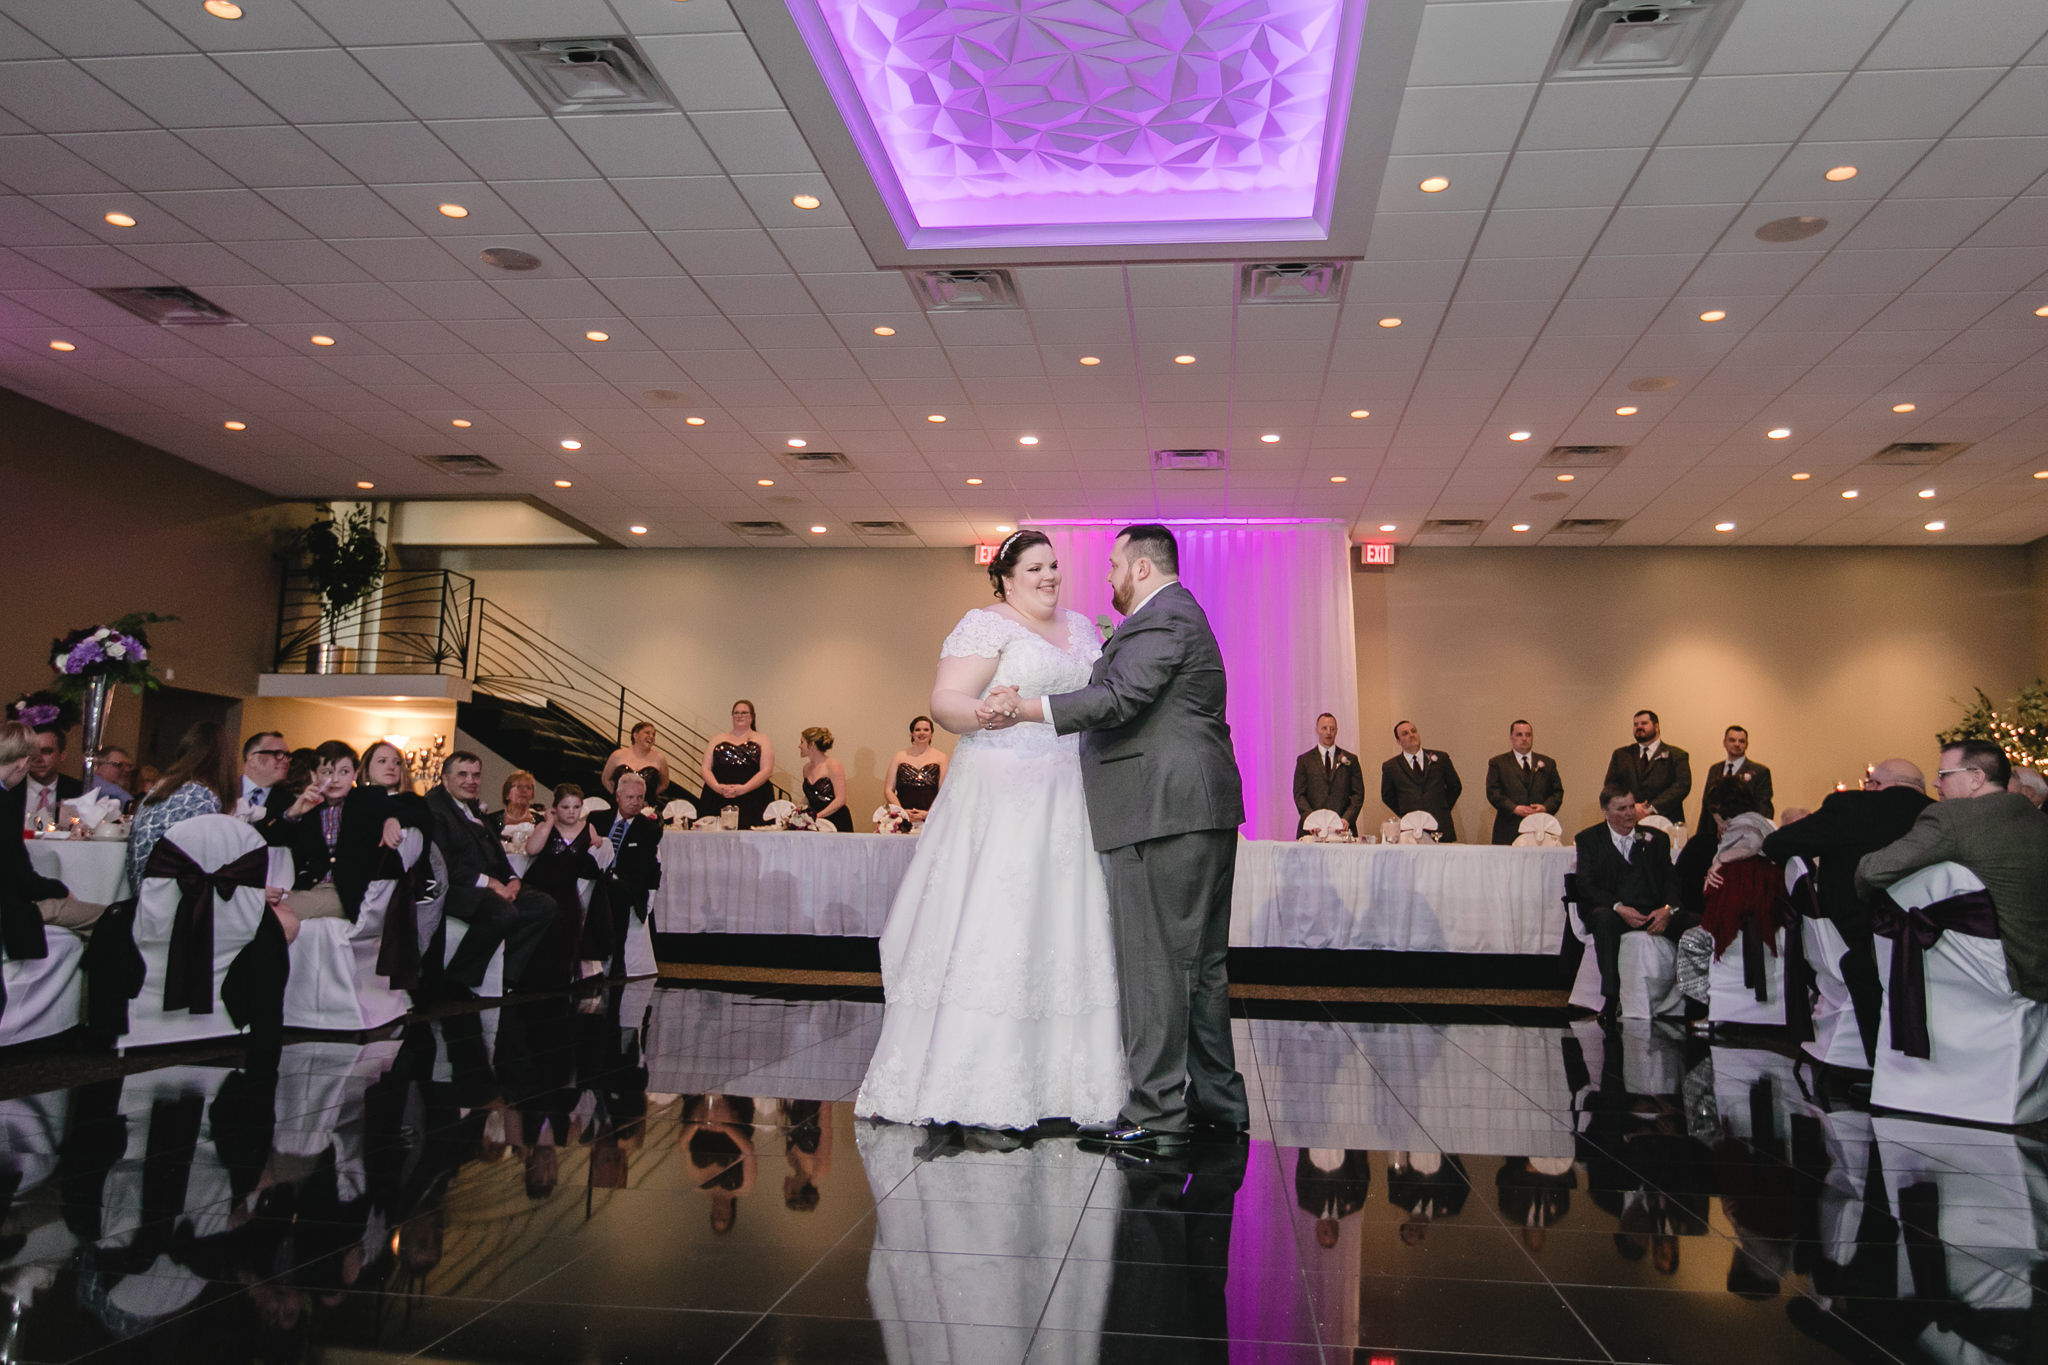 Newlyweds share a first dance in the Balconade Room at the Fez